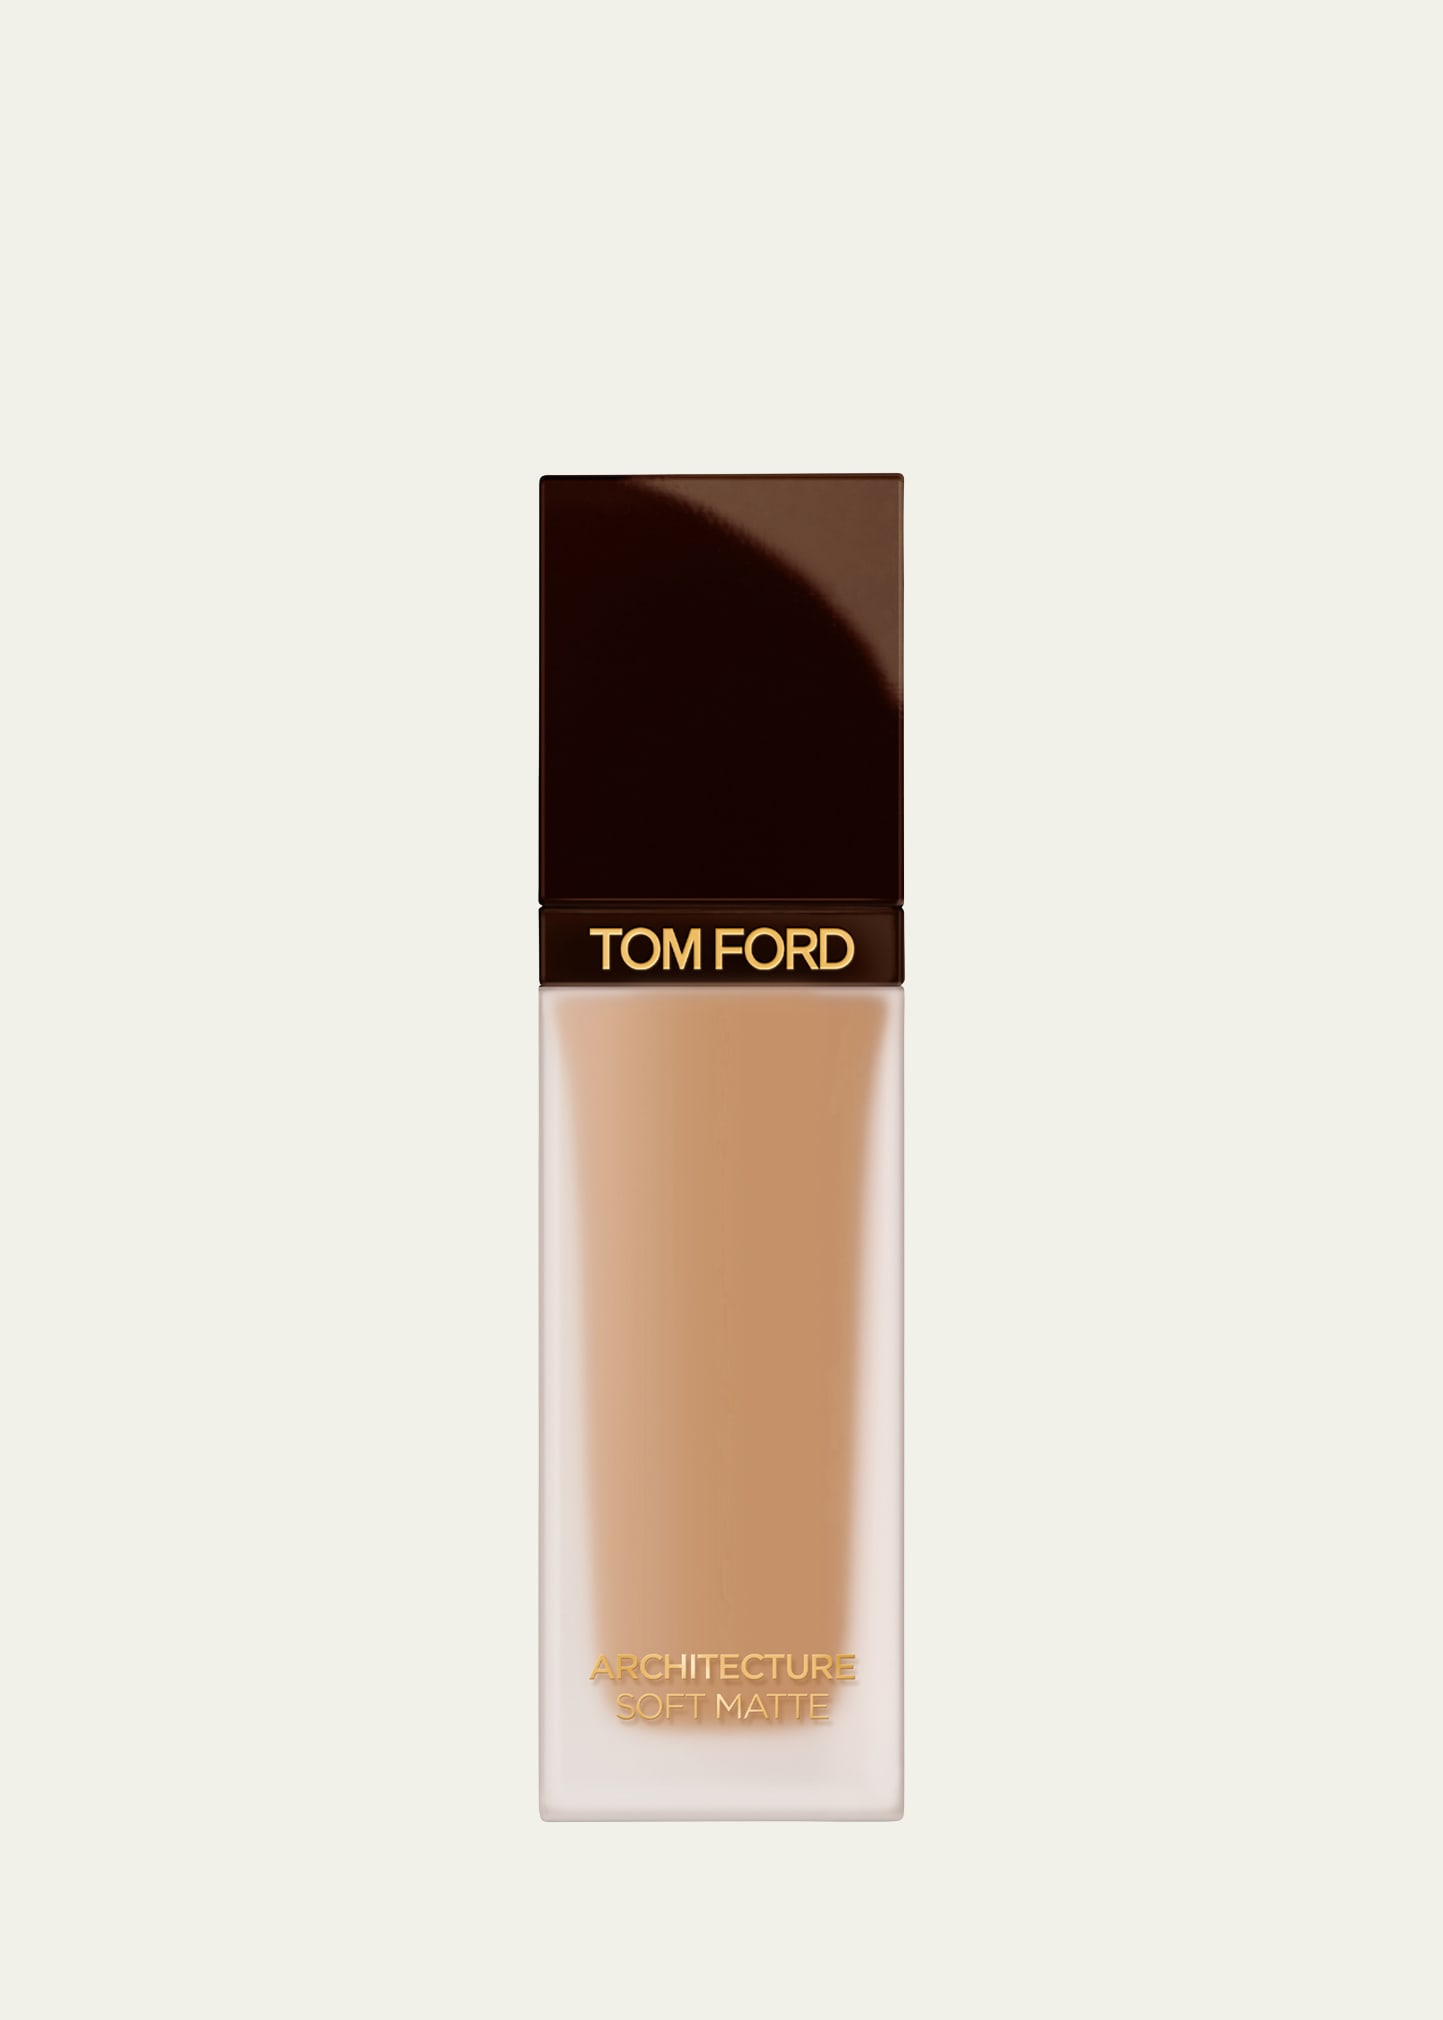 Tom Ford Architecture Soft Matte Foundation In Asm - 6.5 Sable